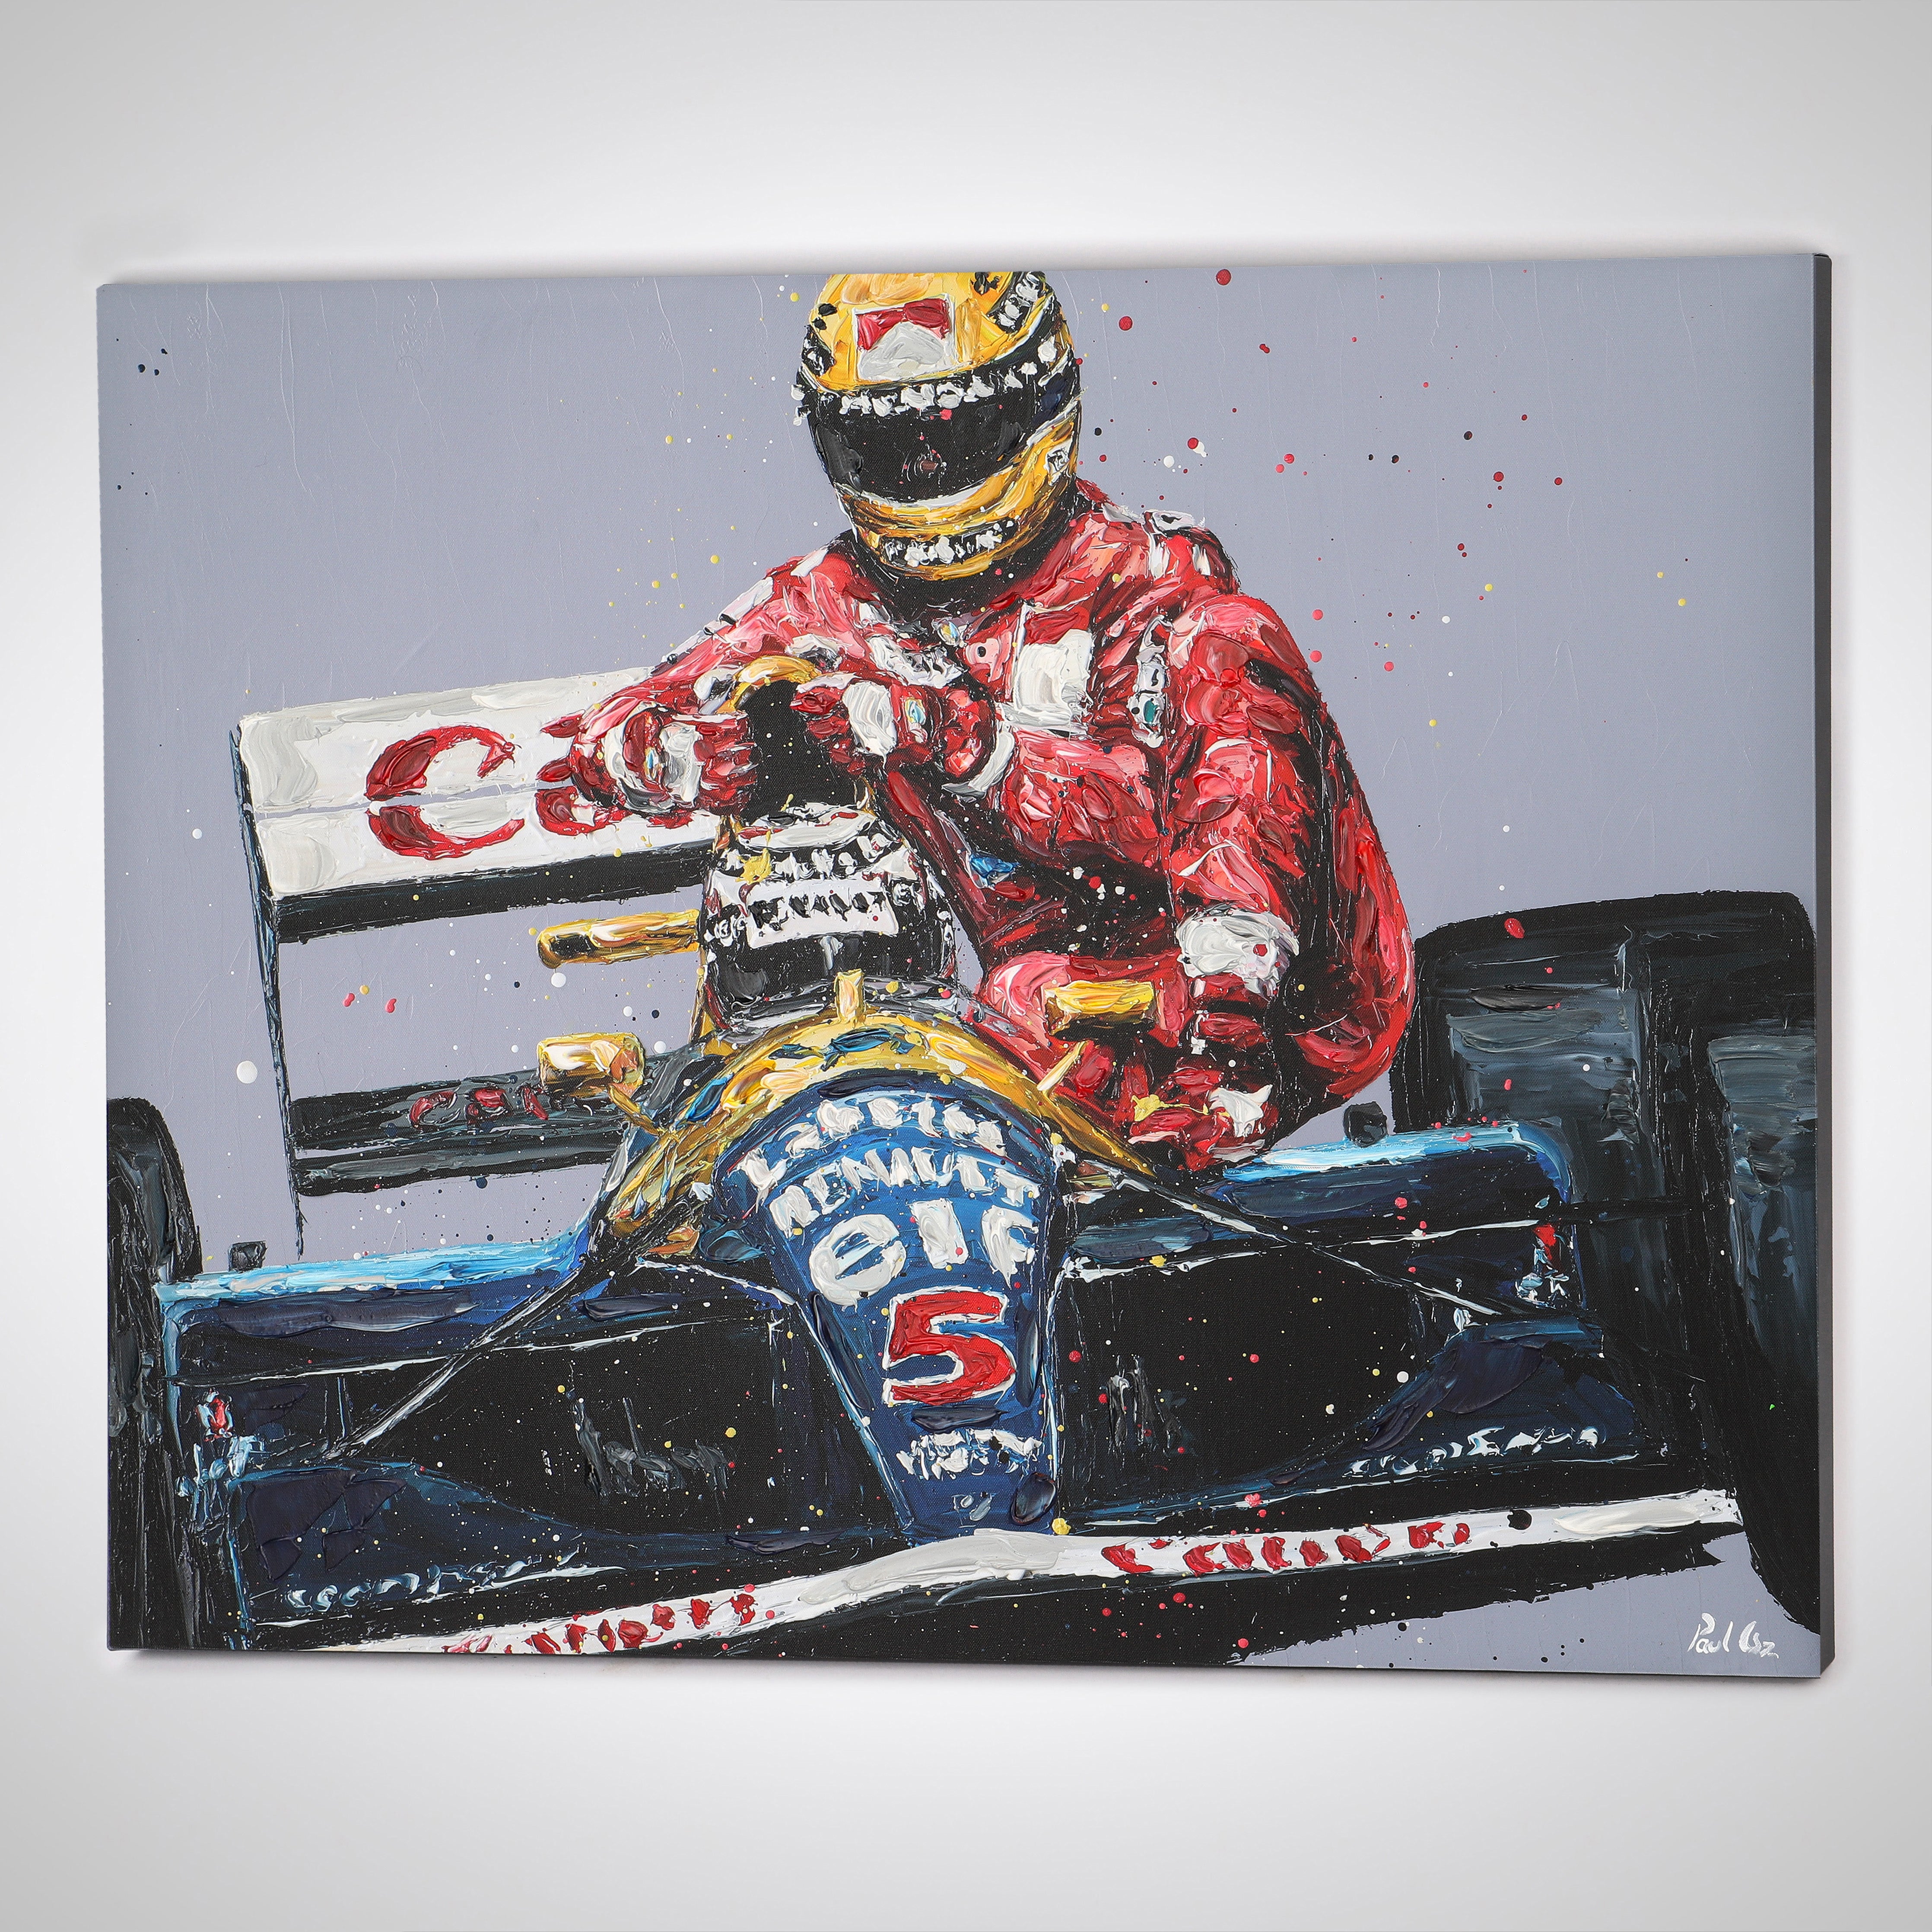 Senna and Mansell 'Taxi Ride' Hand Embellished Artwork - Paul Oz